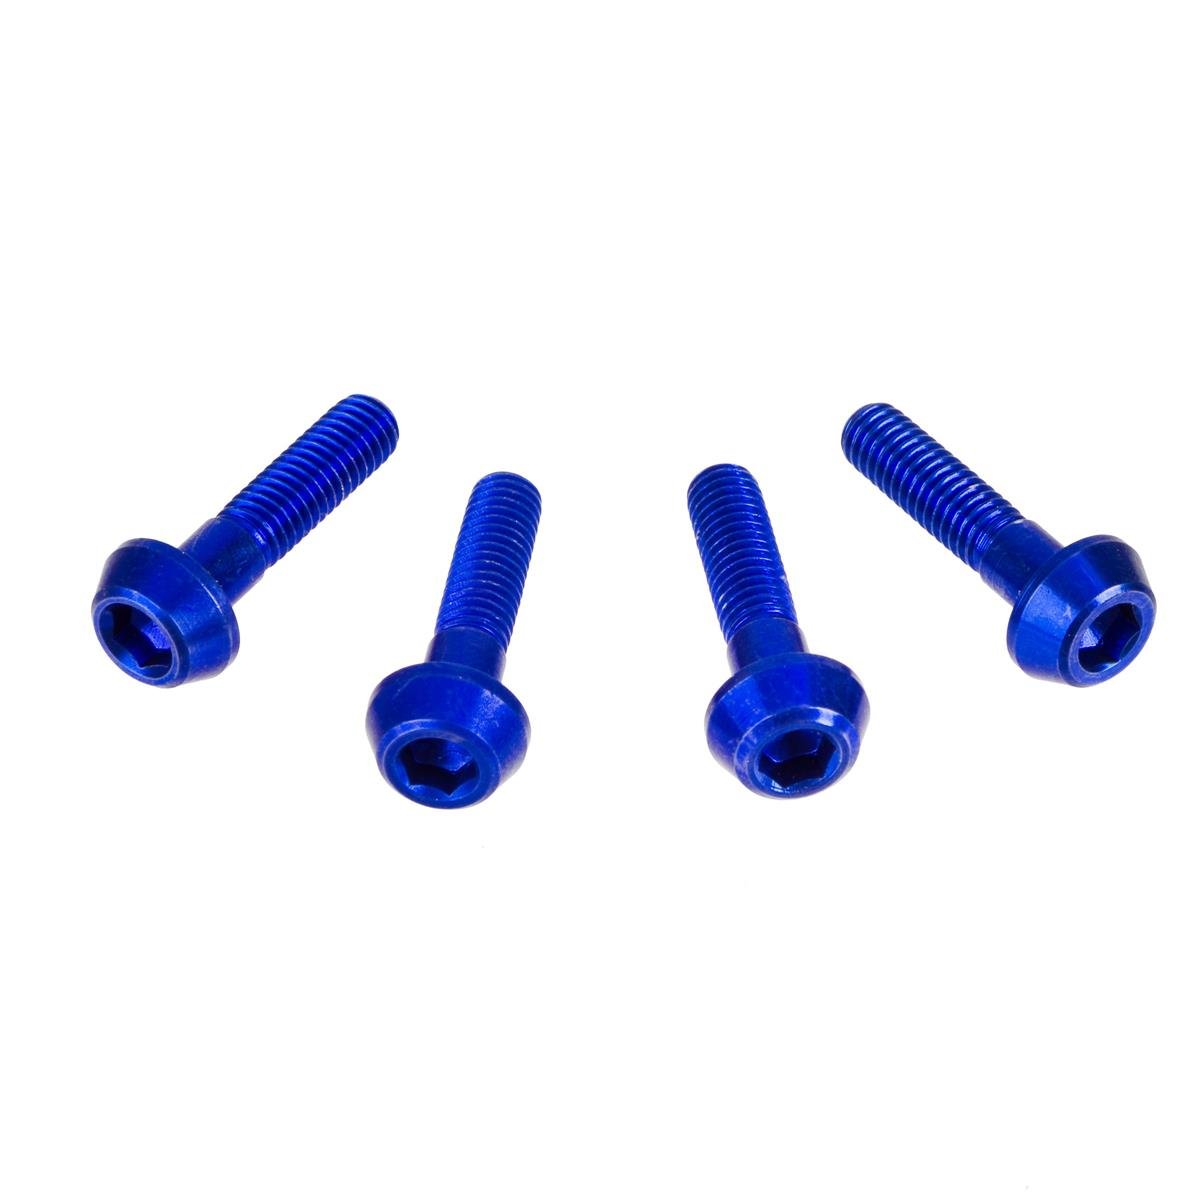 DRC Inner Hex Bolts  M6 x 25 mm, Blue, Pack of 4